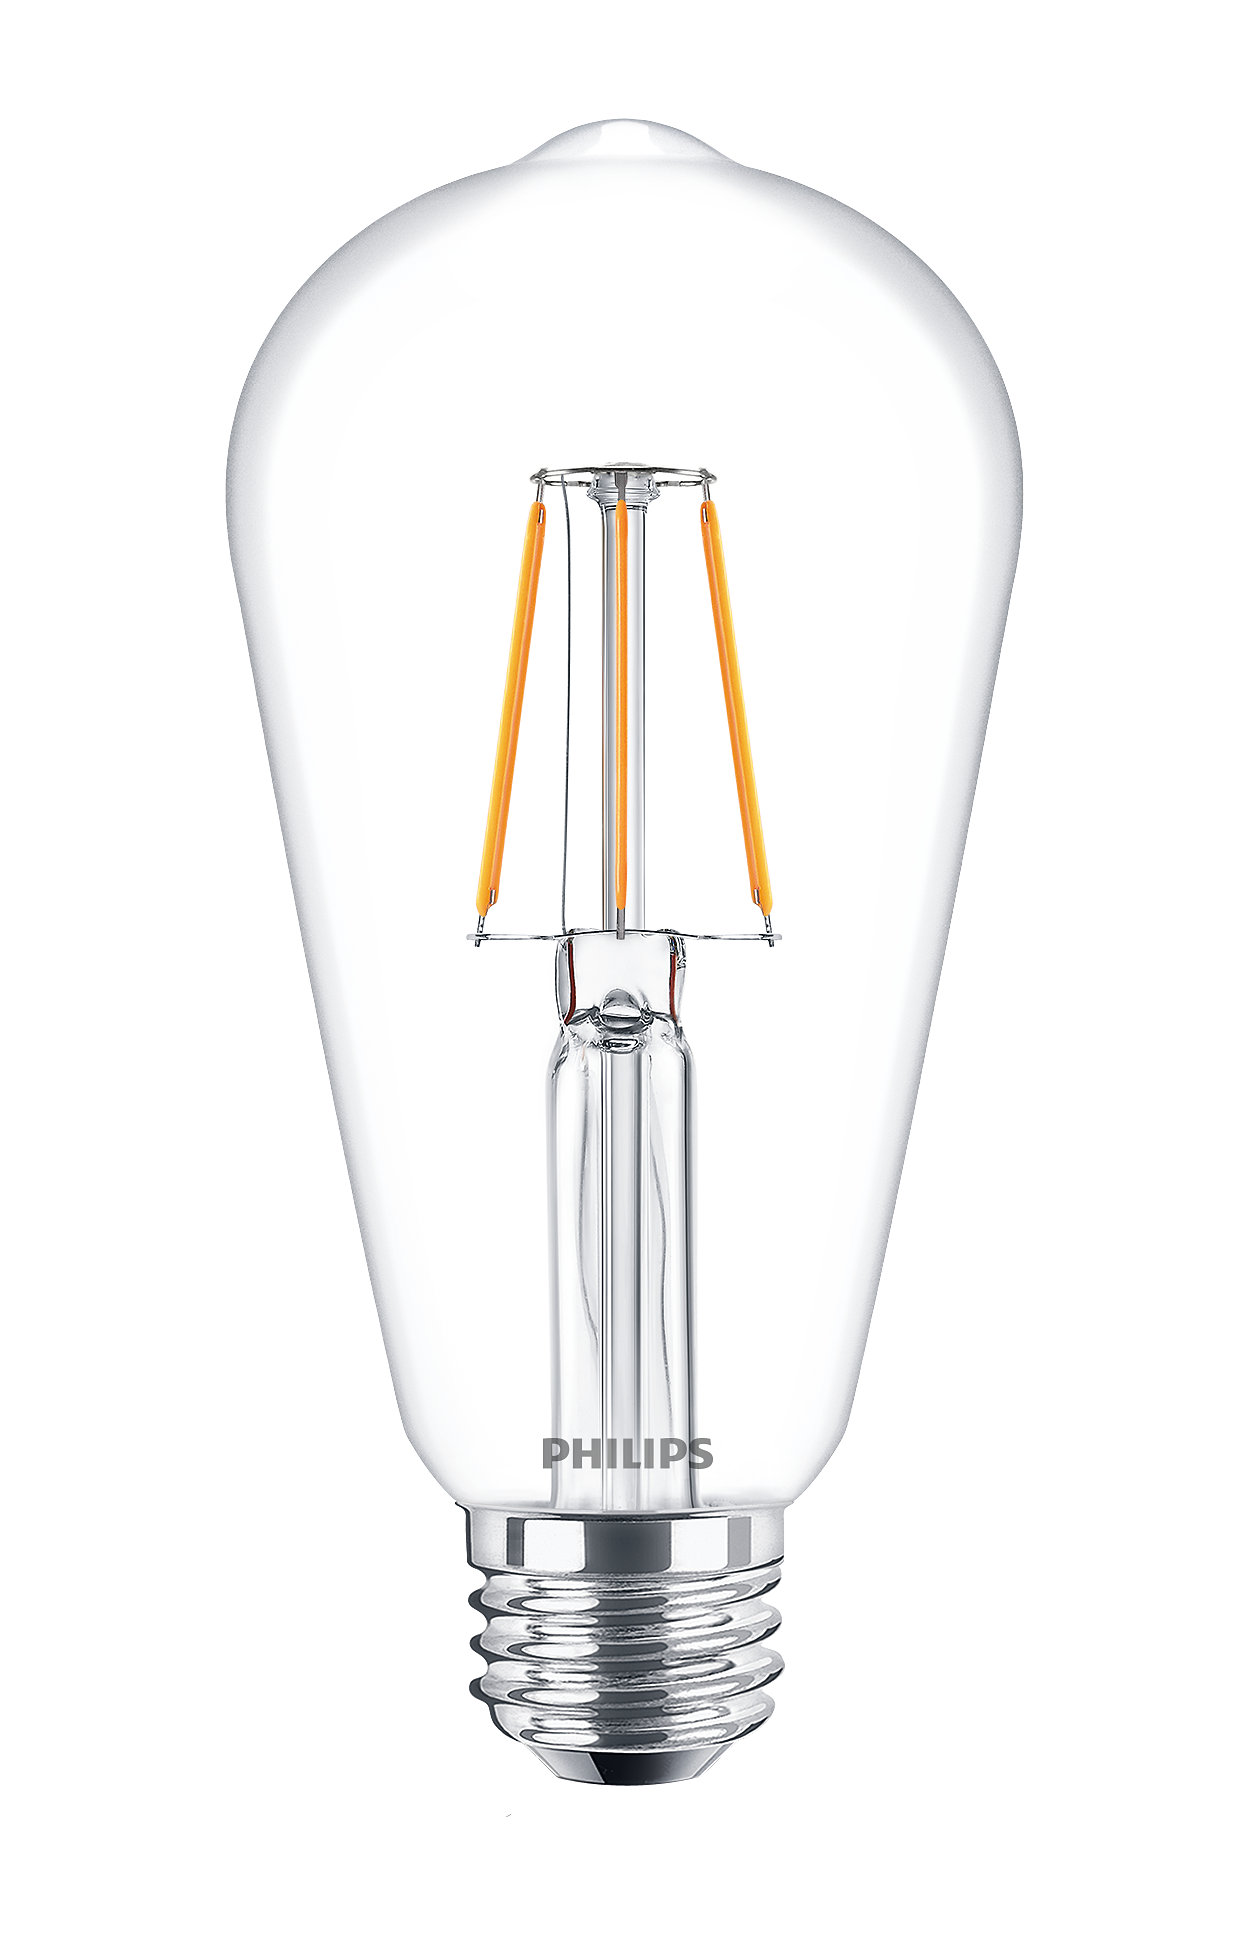 For your everyday lighting jobs, CorePro LED combines the familiar shapes of classic incandescent bulbs with the benefits of long-lasting LED technology